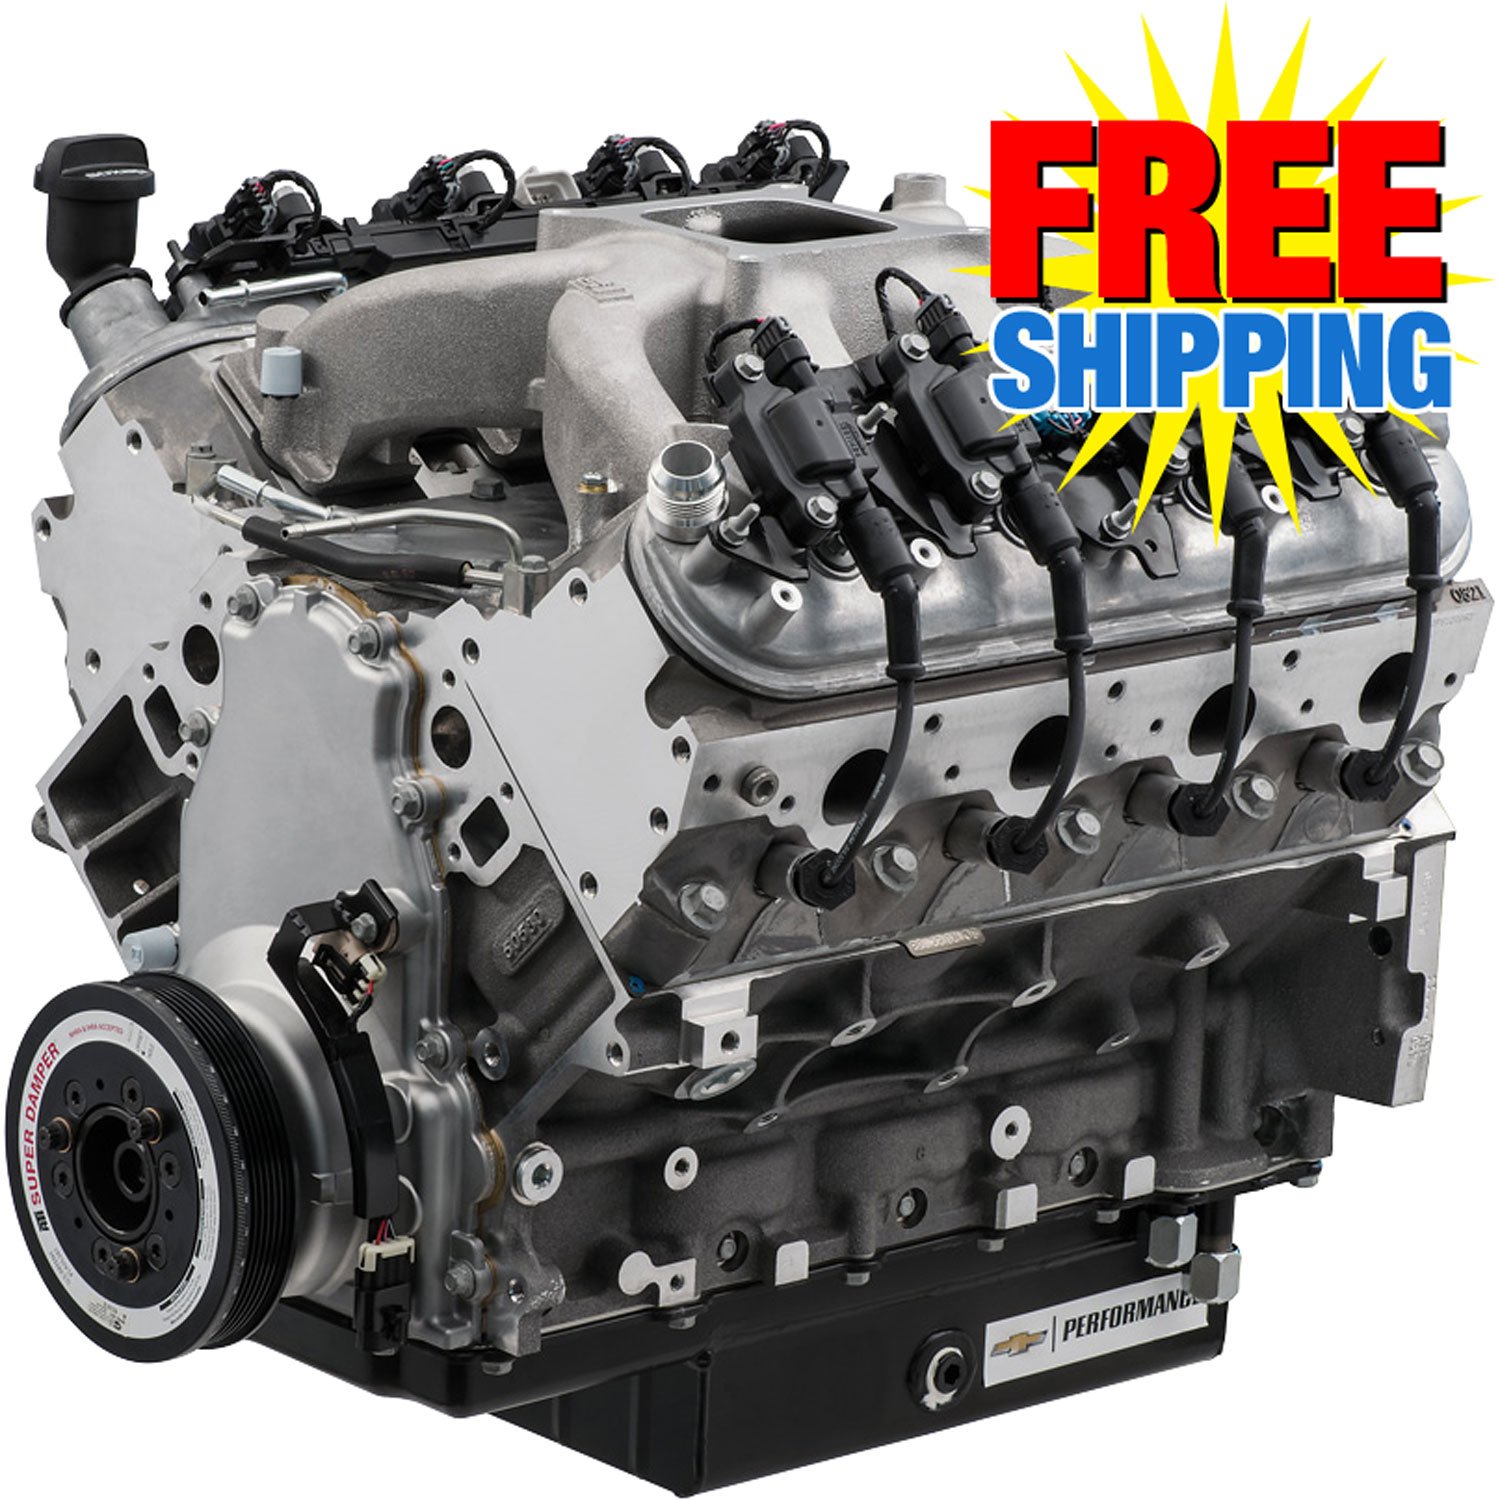 Ls3 crate engine for sale